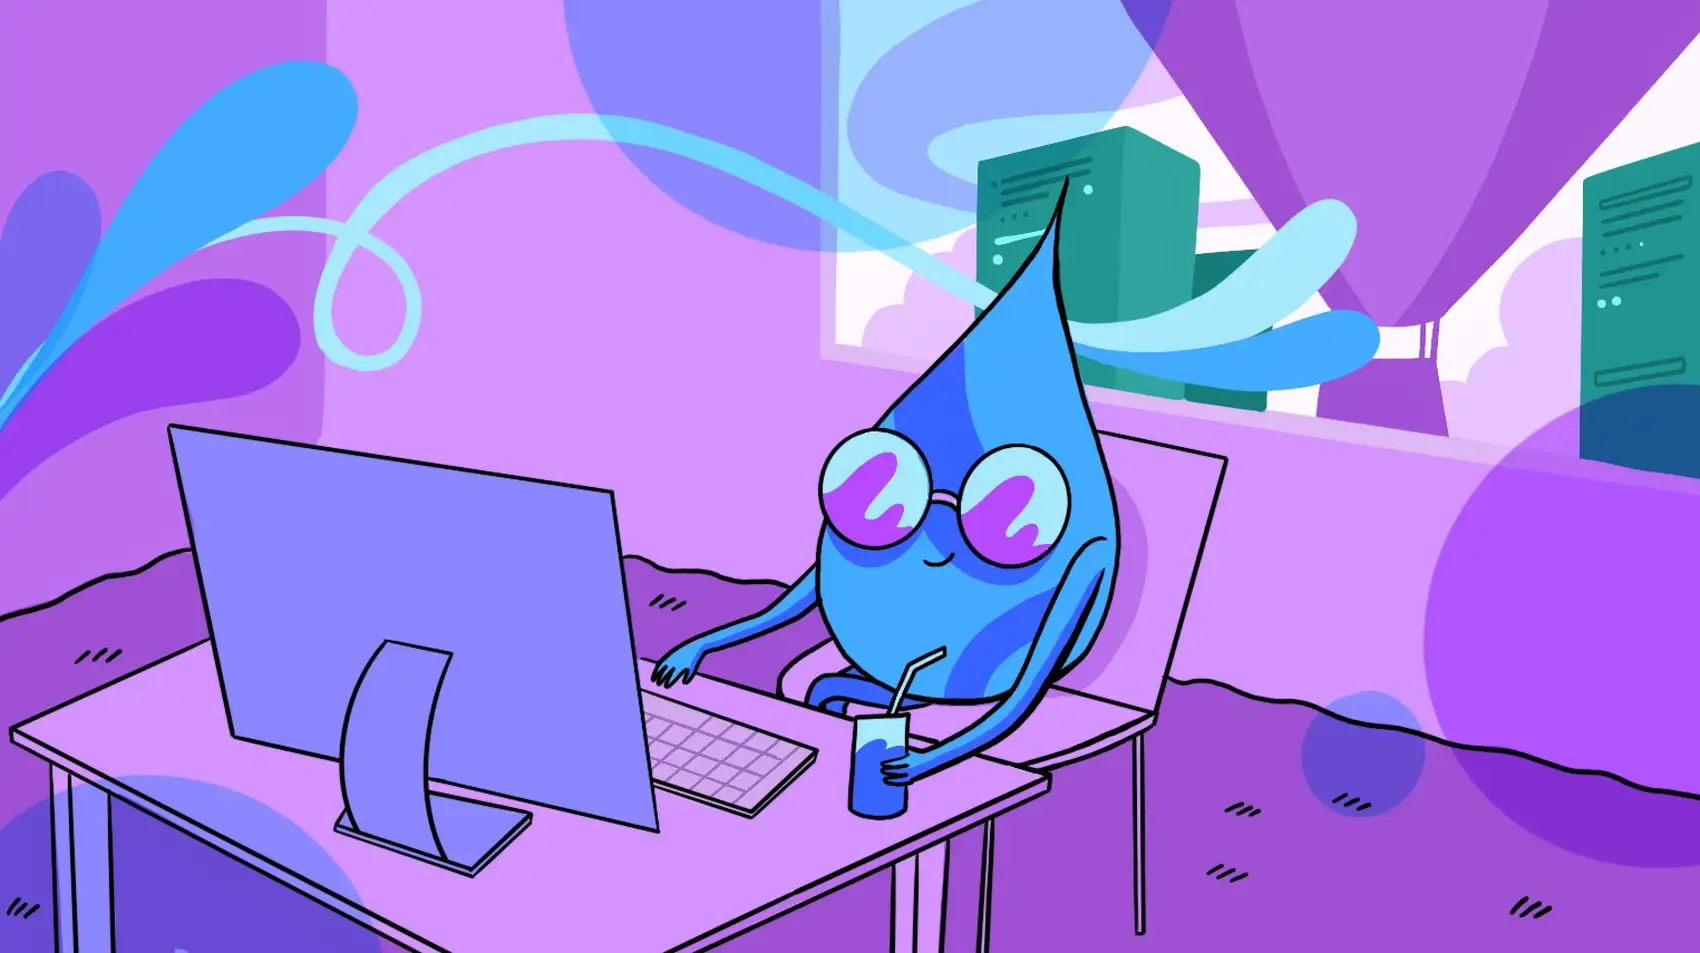 A cool Elixir drop character wearing sunglasses at a computer. The computer is wired directly to a Fly balloon out the window.